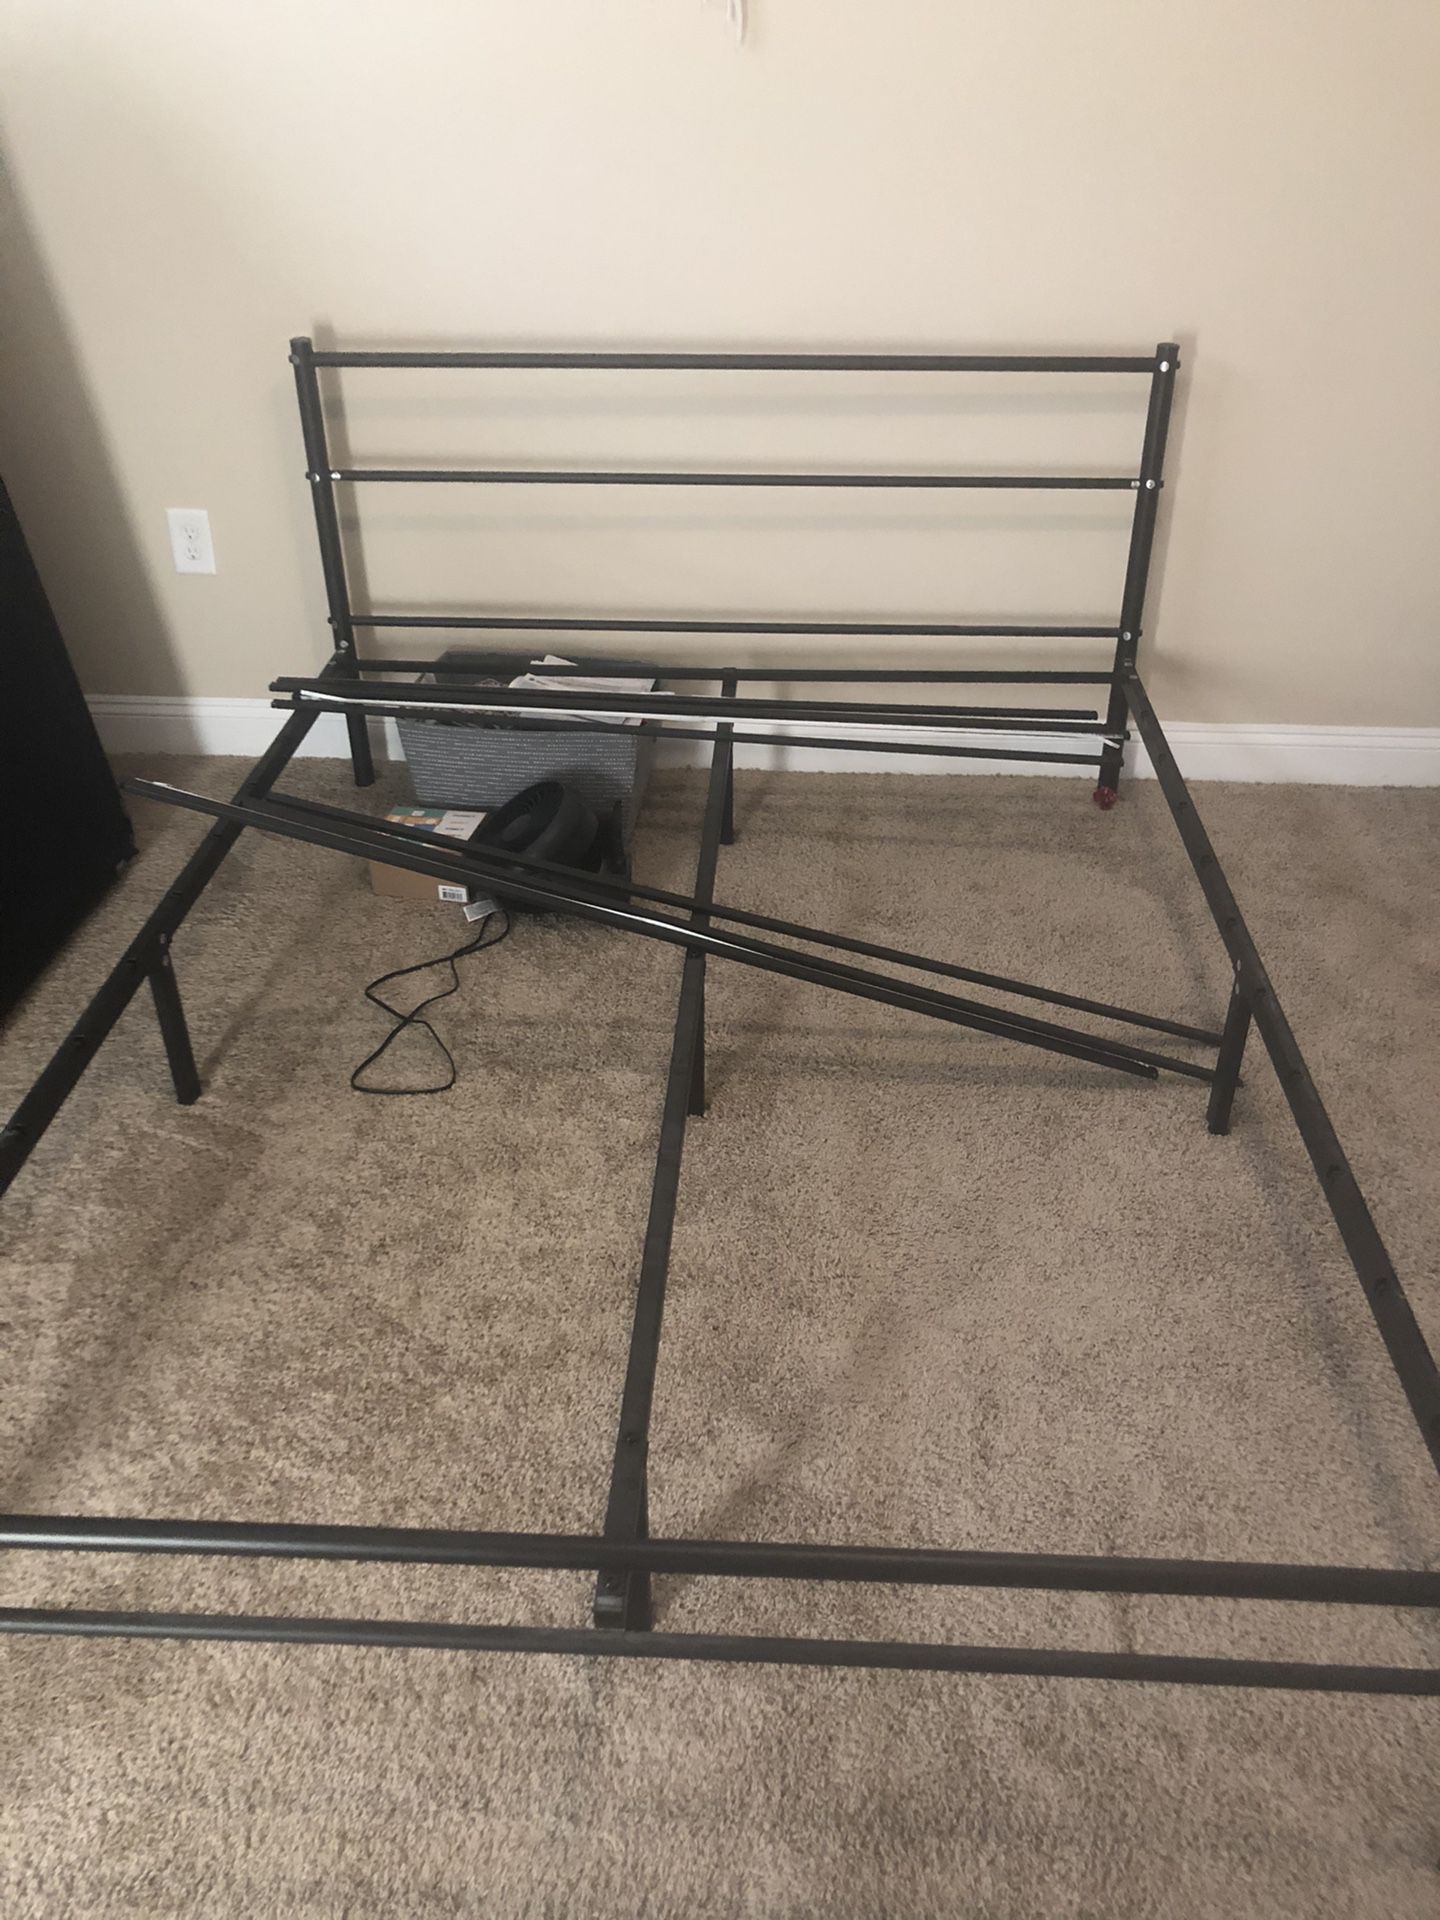 Queen Bed frame has dividers inside too BARLEY USED